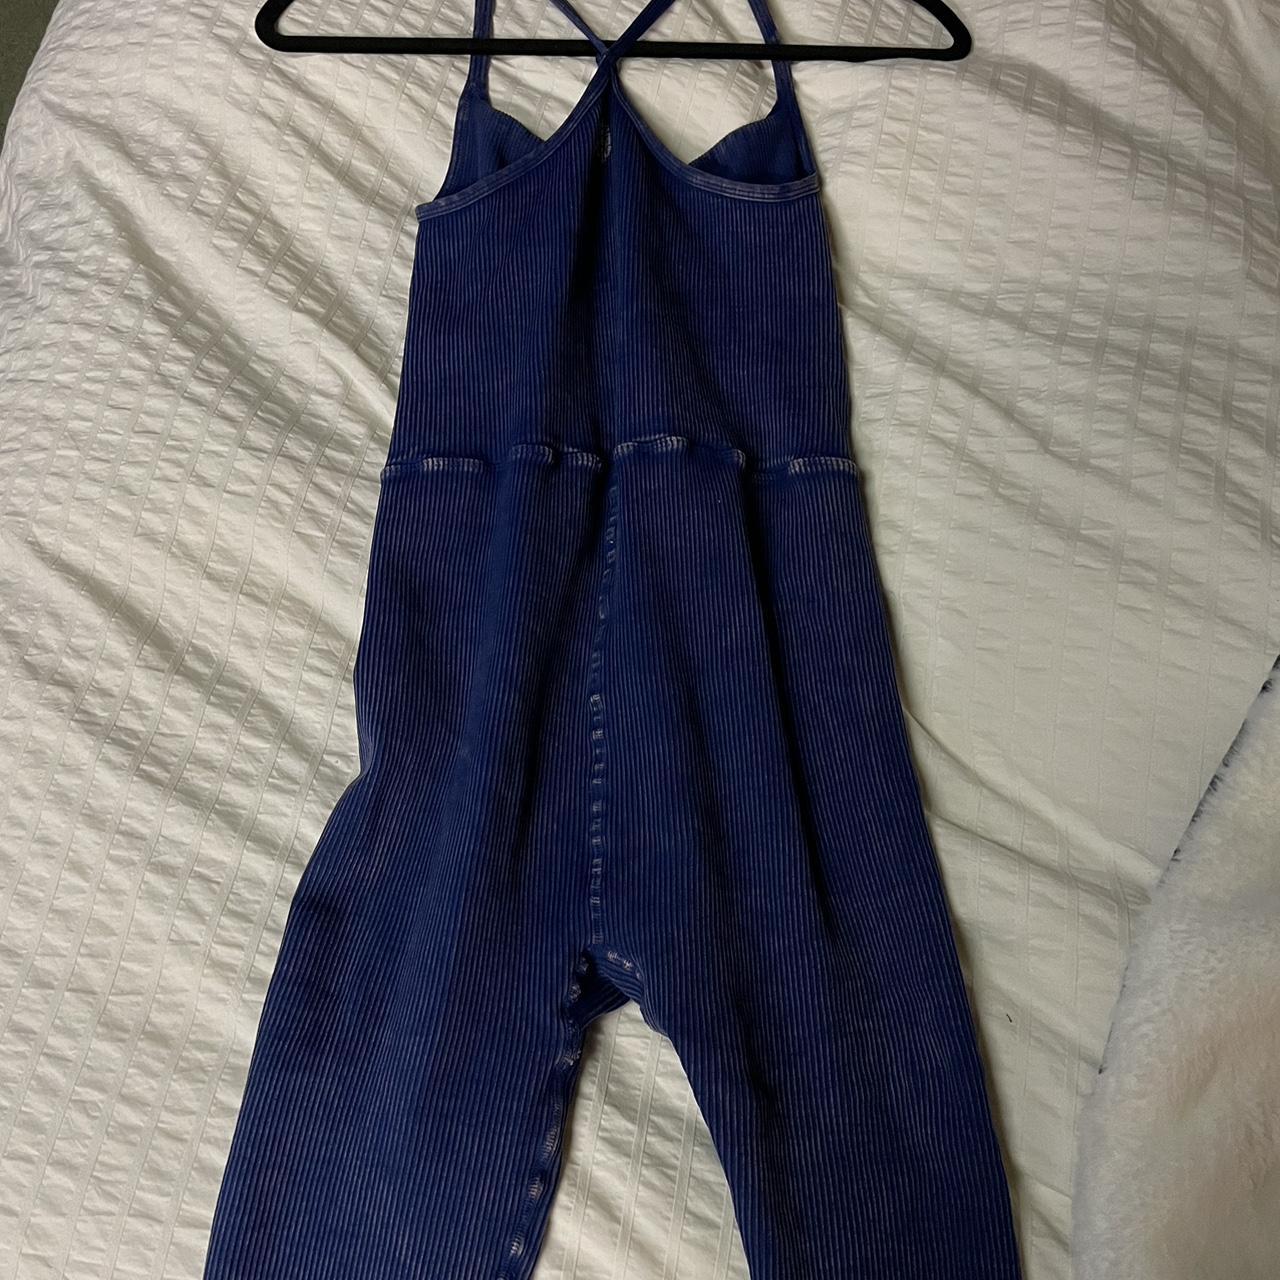 Free people ribbed one piece faded blue. - Depop